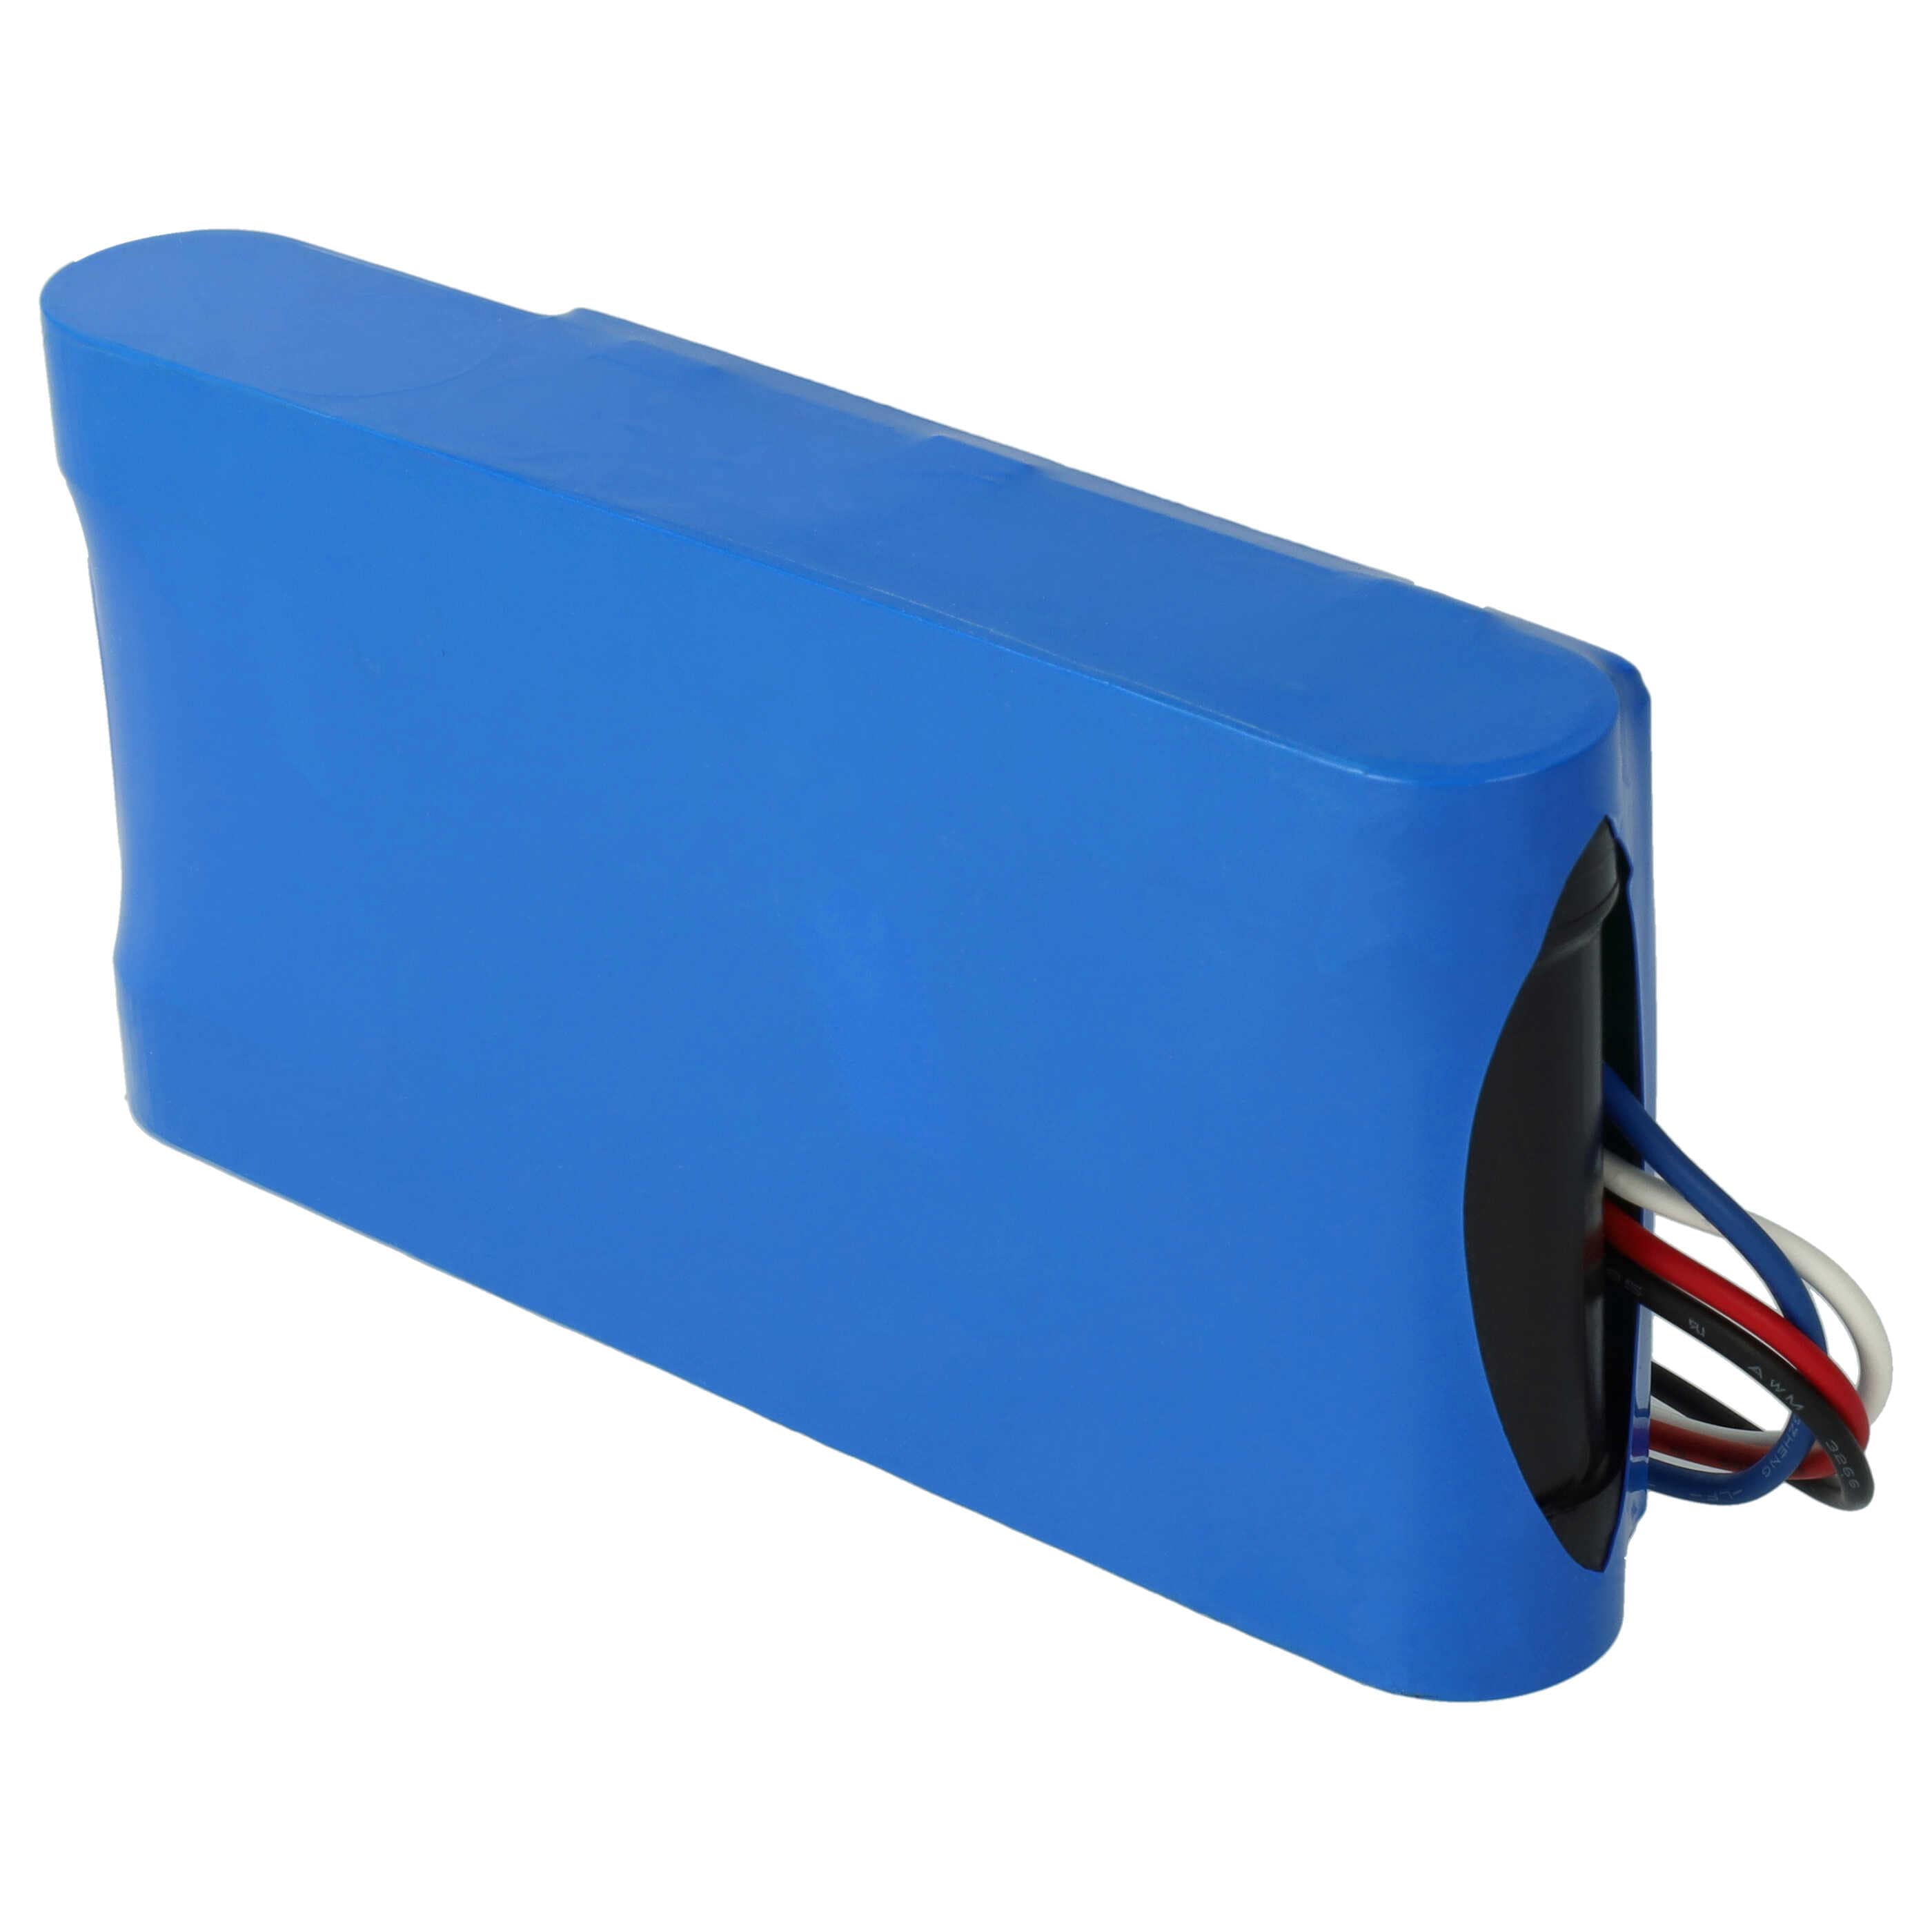 Lawnmower Battery Replacement for Yard Force 1920726 - 2500mAh 18V Li-Ion